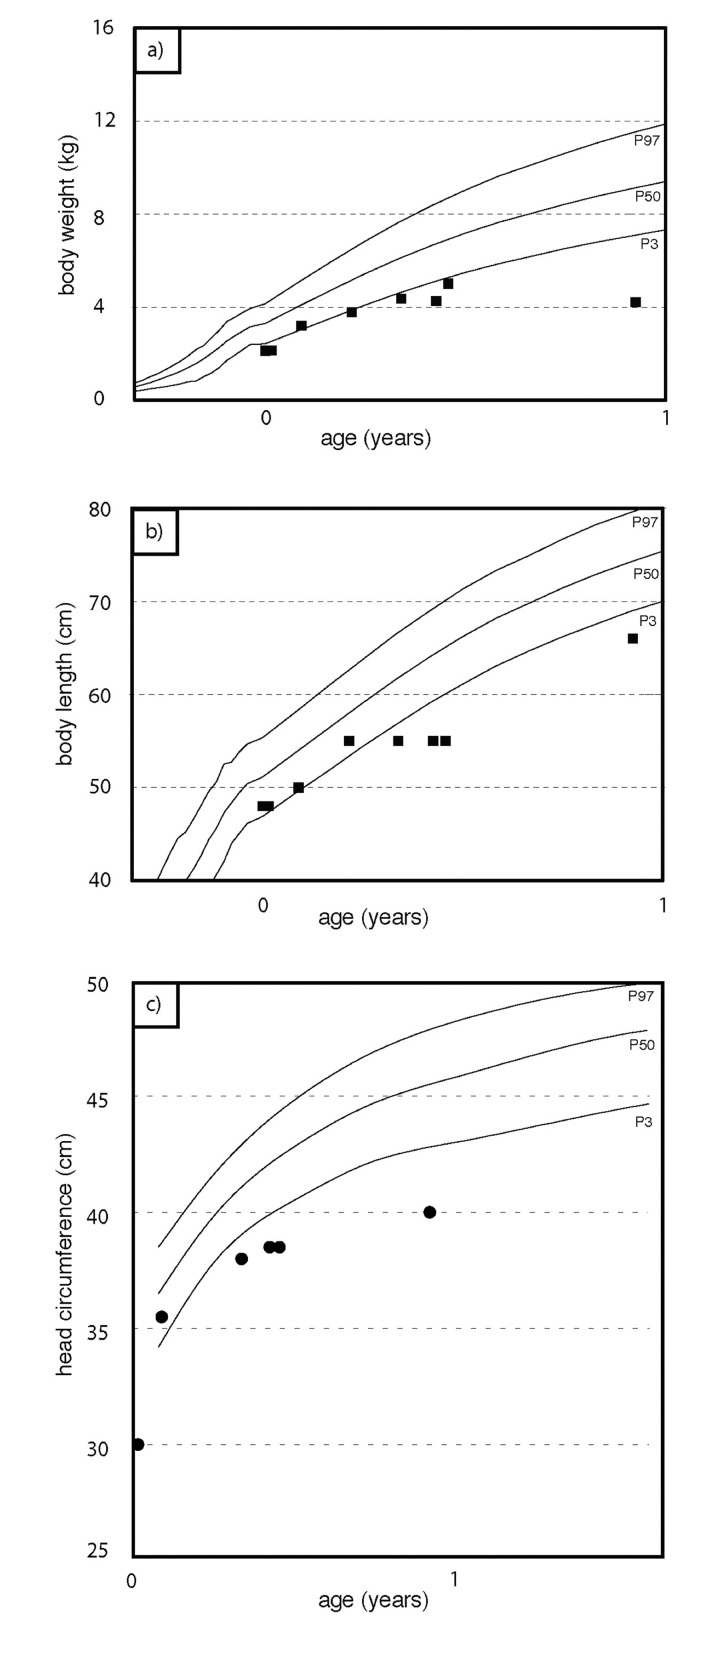 Weight percentiles (a), growth percentiles (b), head circumference percentiles (c) during the course of the disease. At birth, the patient was small for gestational age. Weight gain stagnates at about two months of age. Length and head circumference growth rank below 3rd percentile.